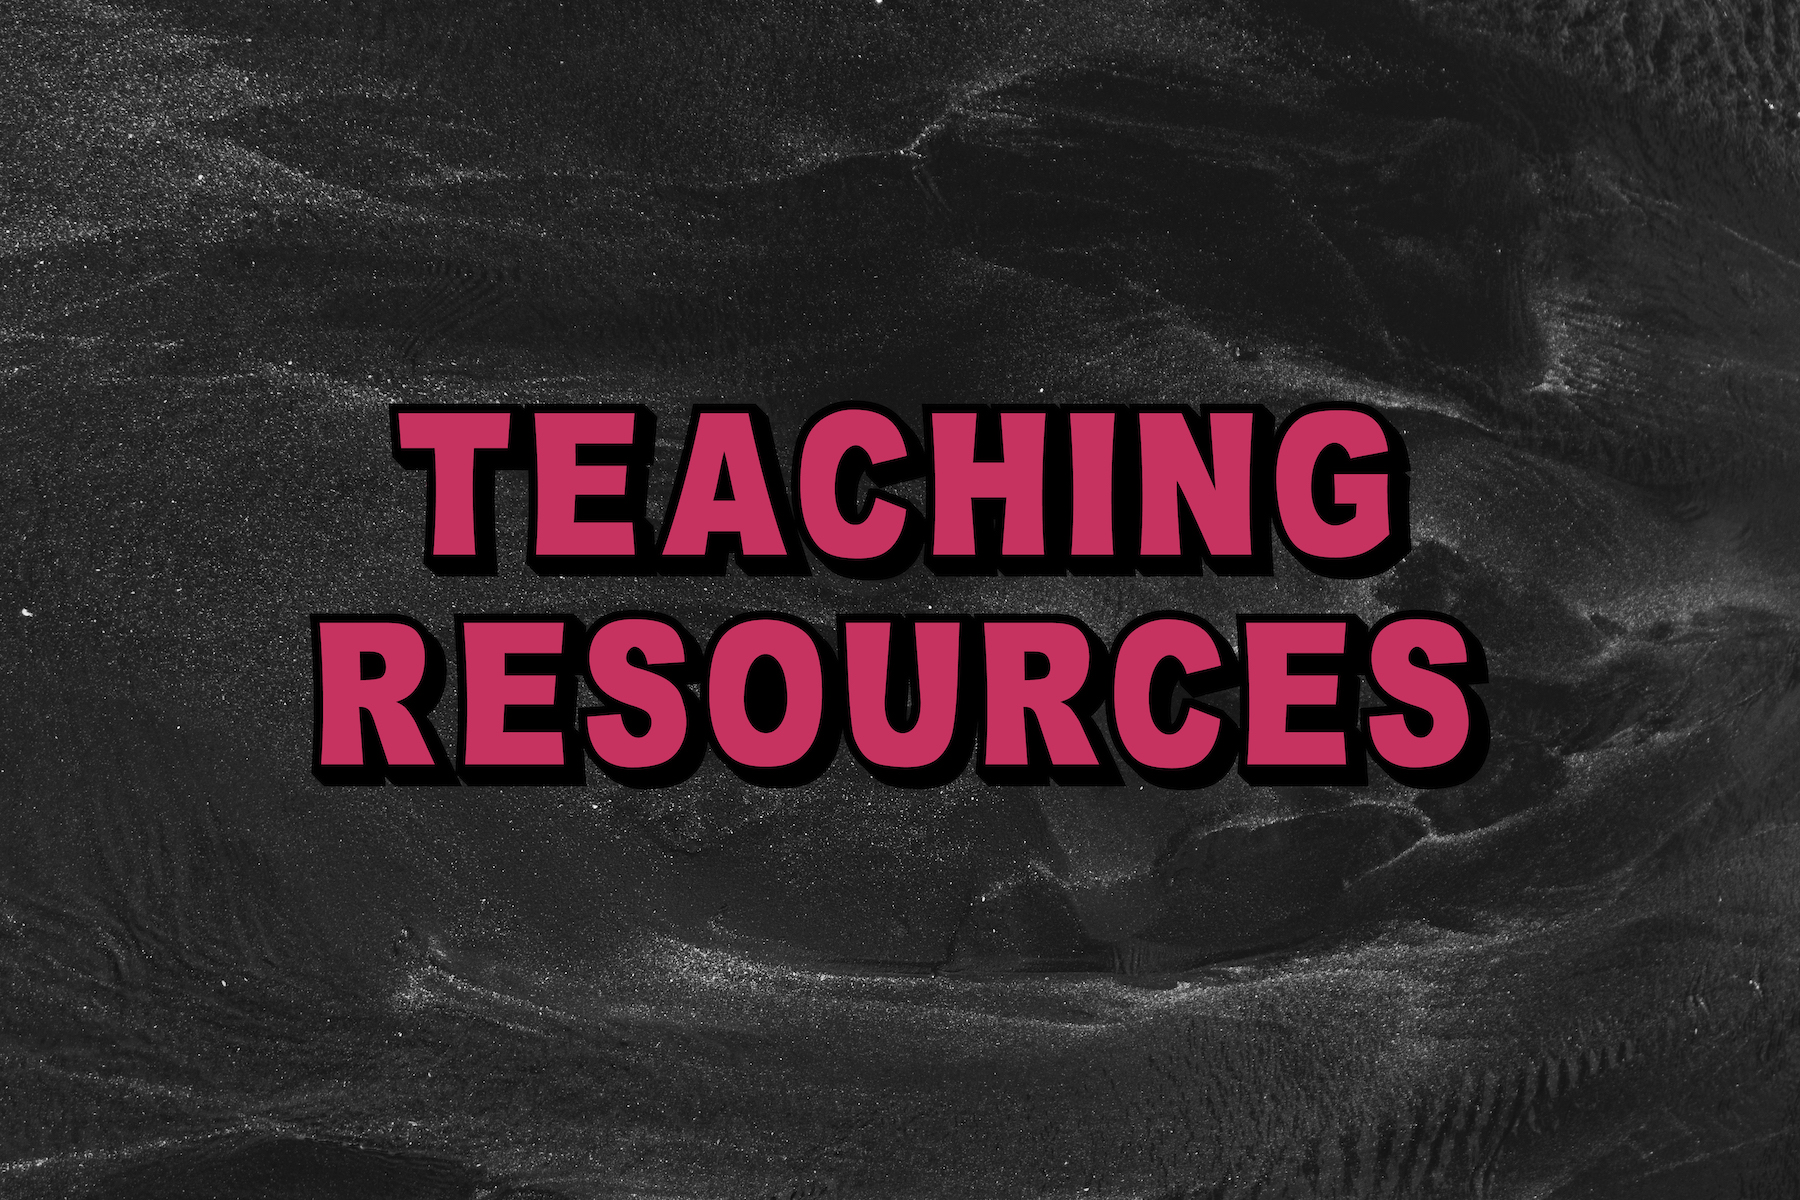 The words 'teaching resources' written in pink block letters on a black background.